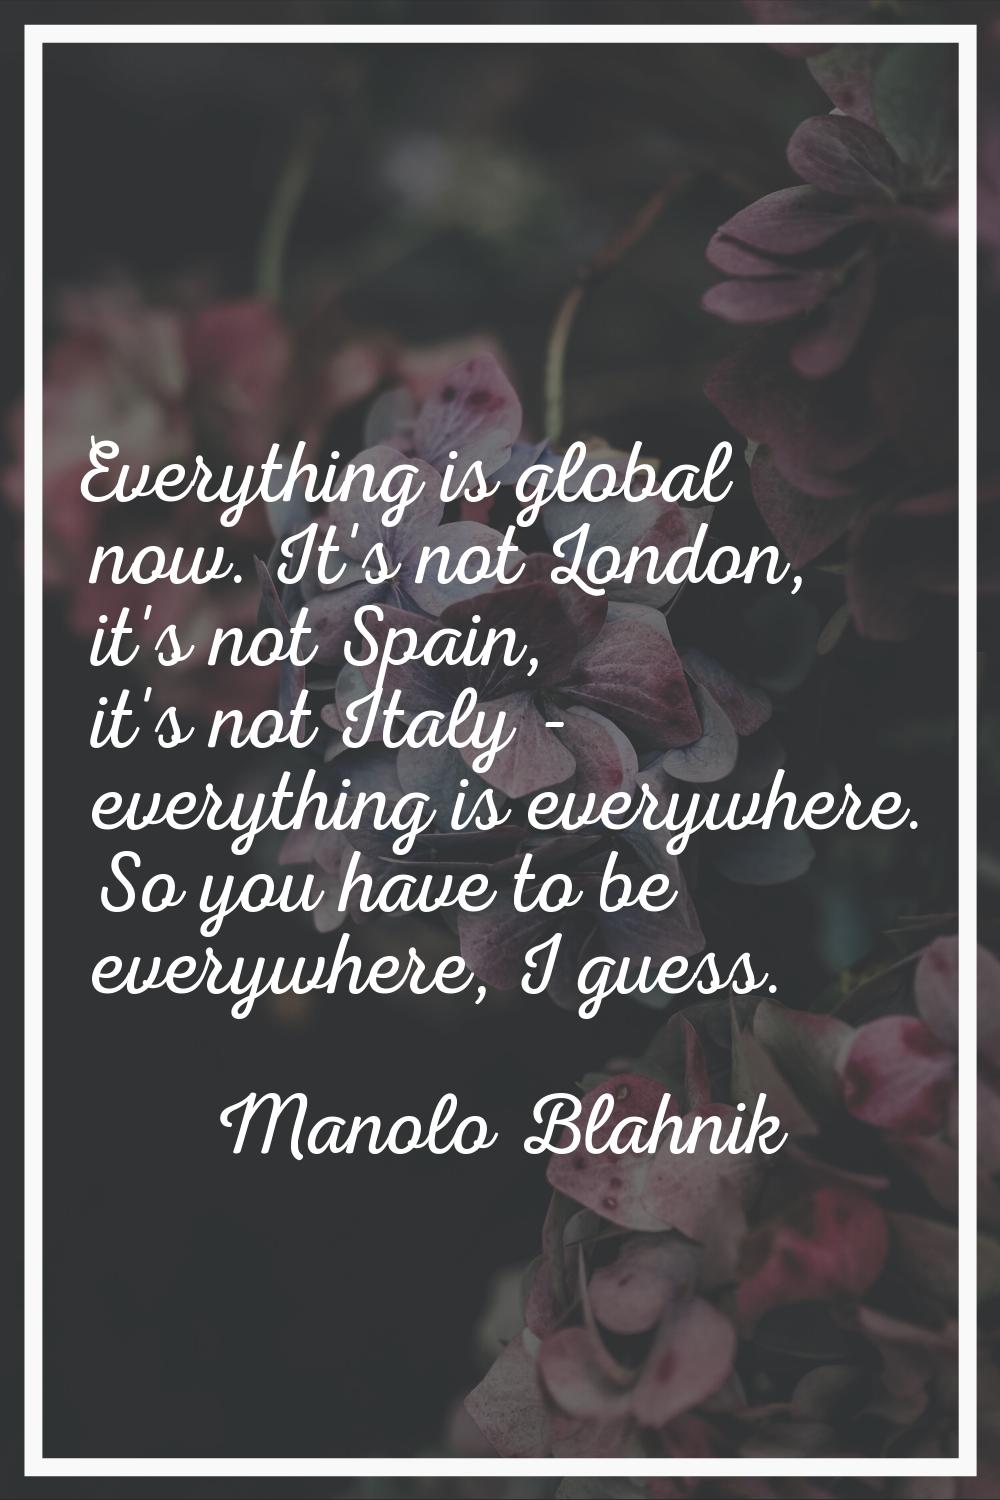 Everything is global now. It's not London, it's not Spain, it's not Italy - everything is everywher